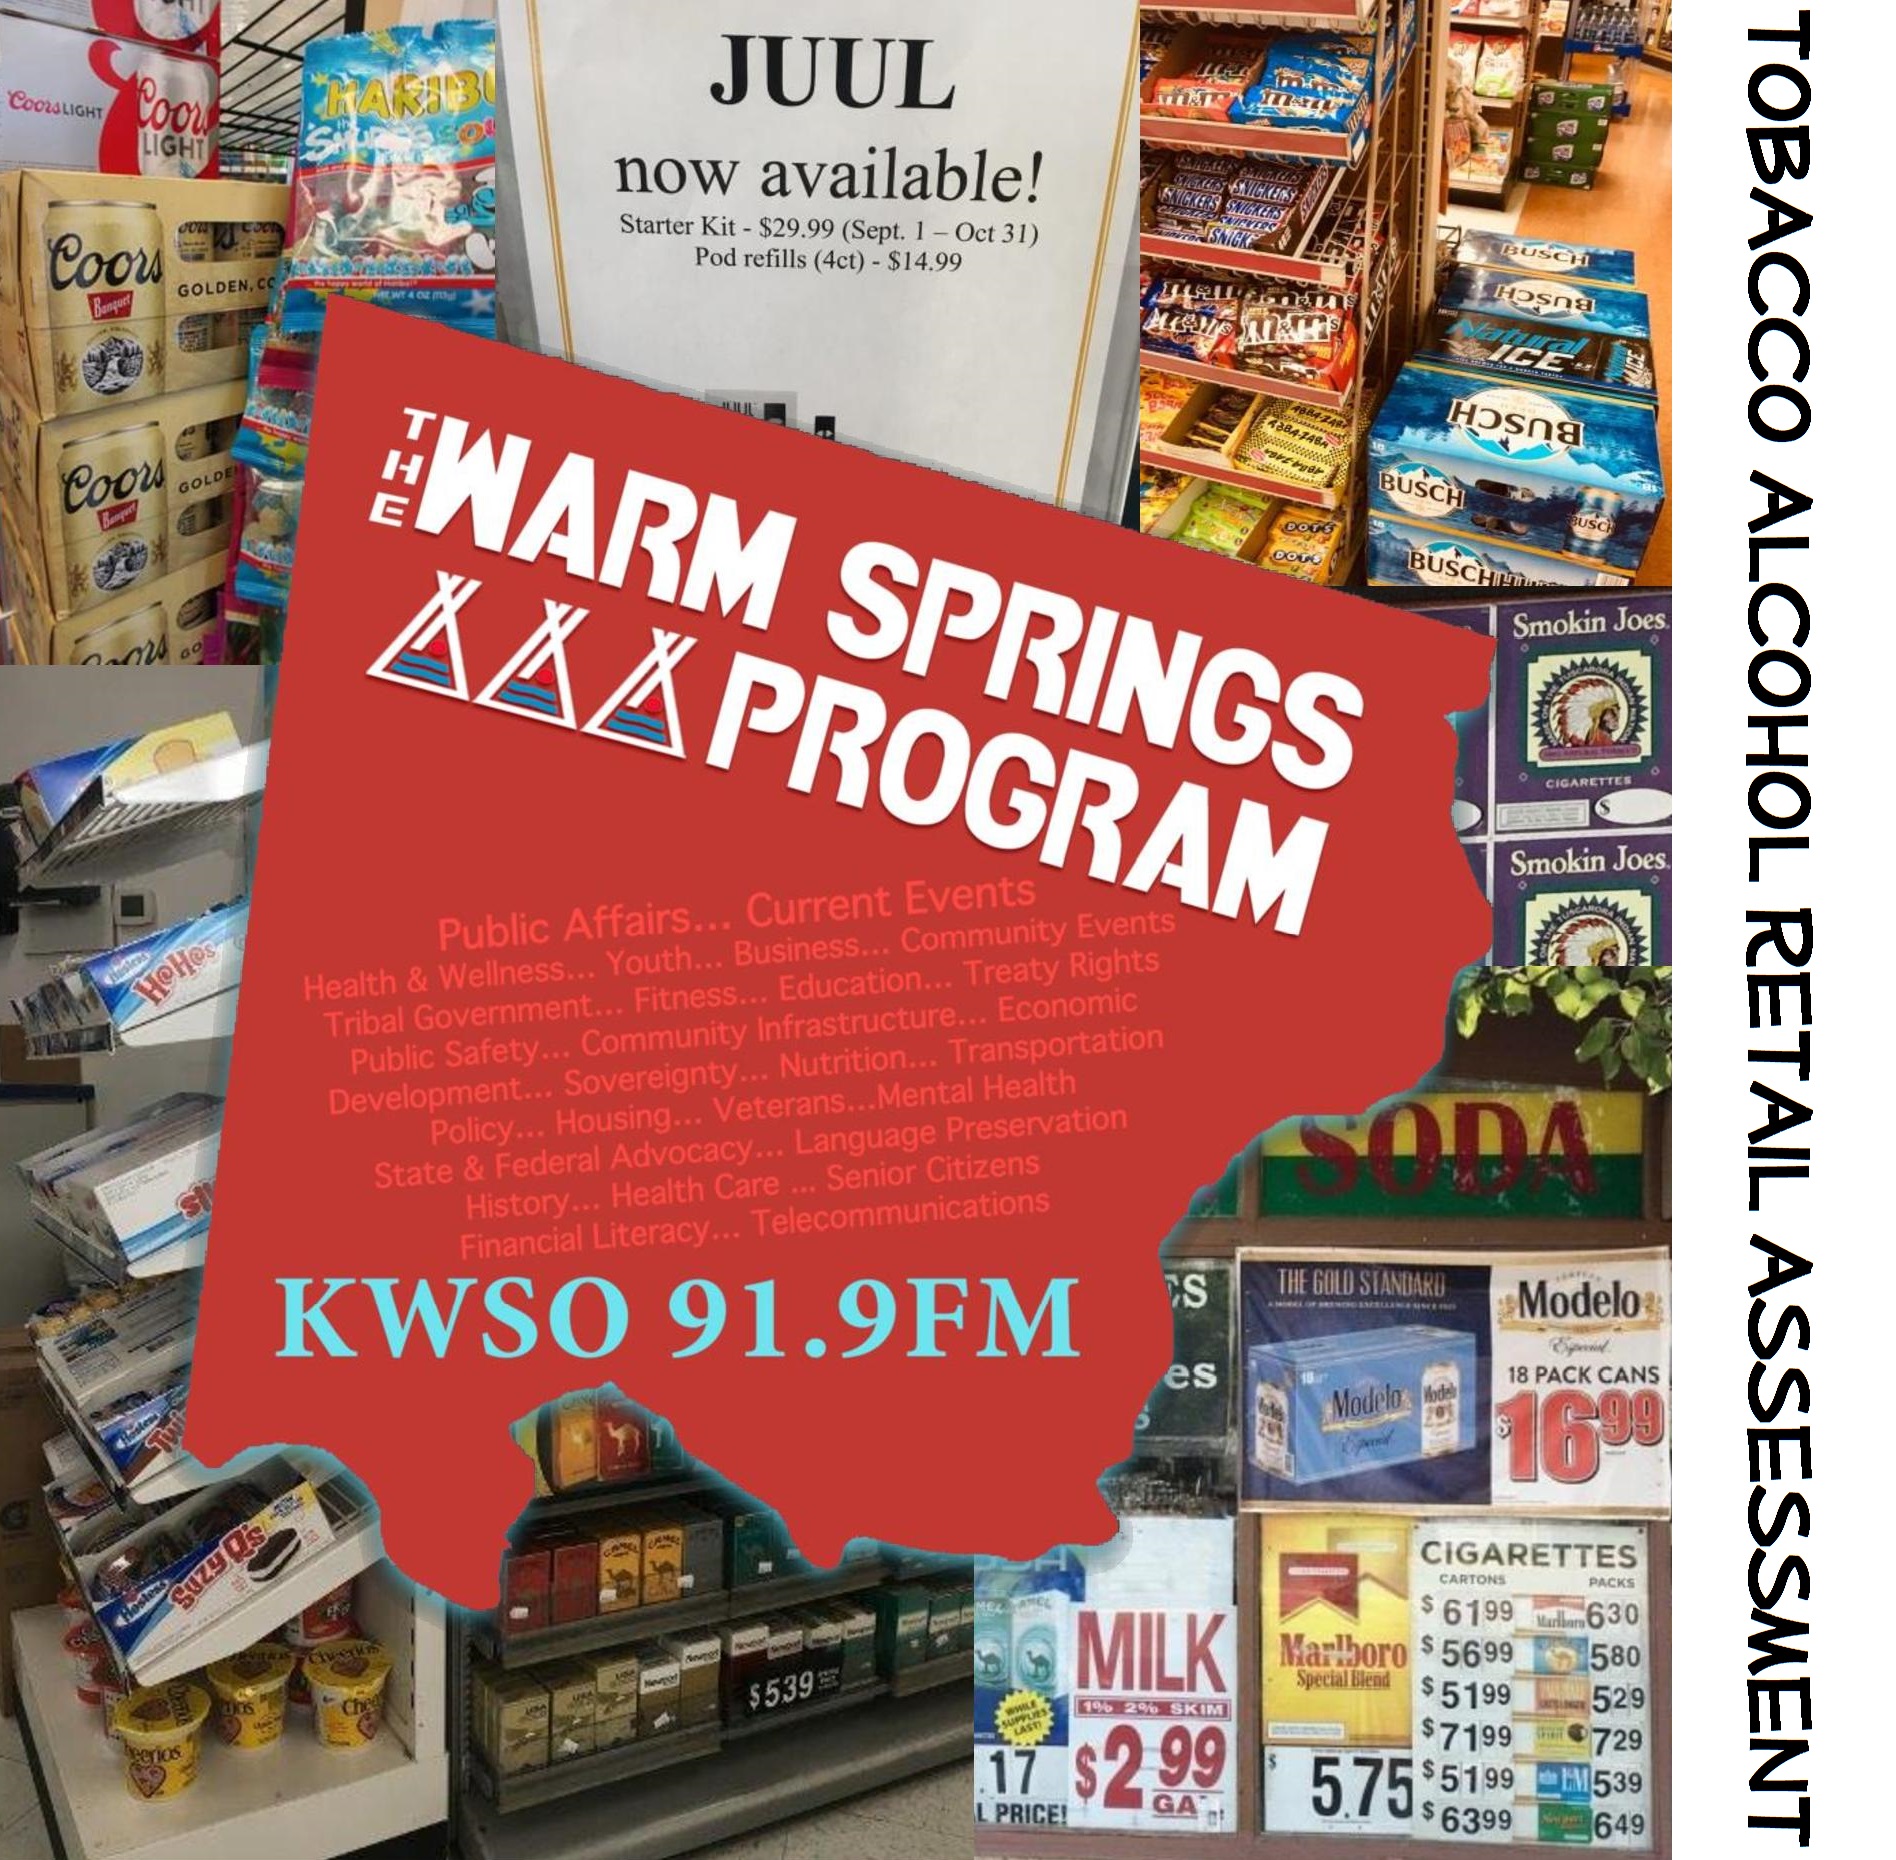 Tobacco & Alcohol Advertising in Retail Stores - KWSO 91.9